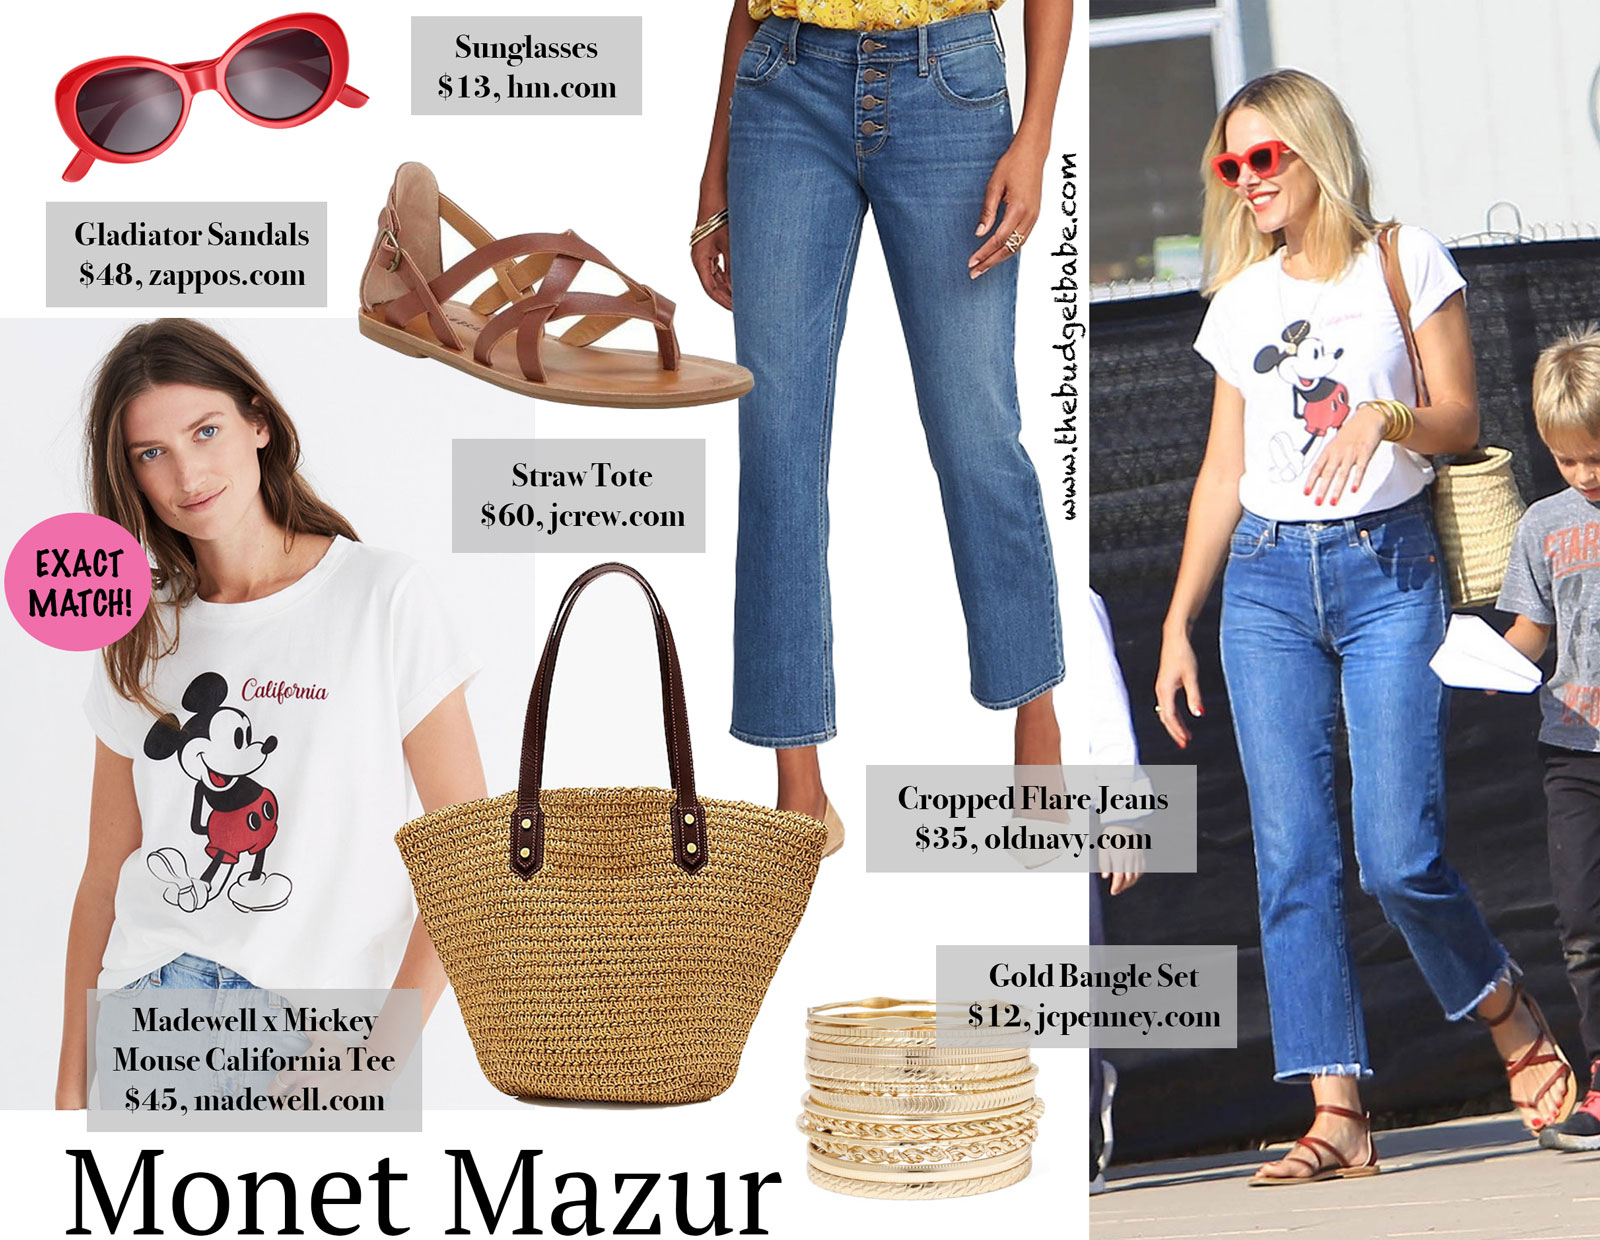 Money Mazur Madewell Mickey Mouse Tee Look for Less